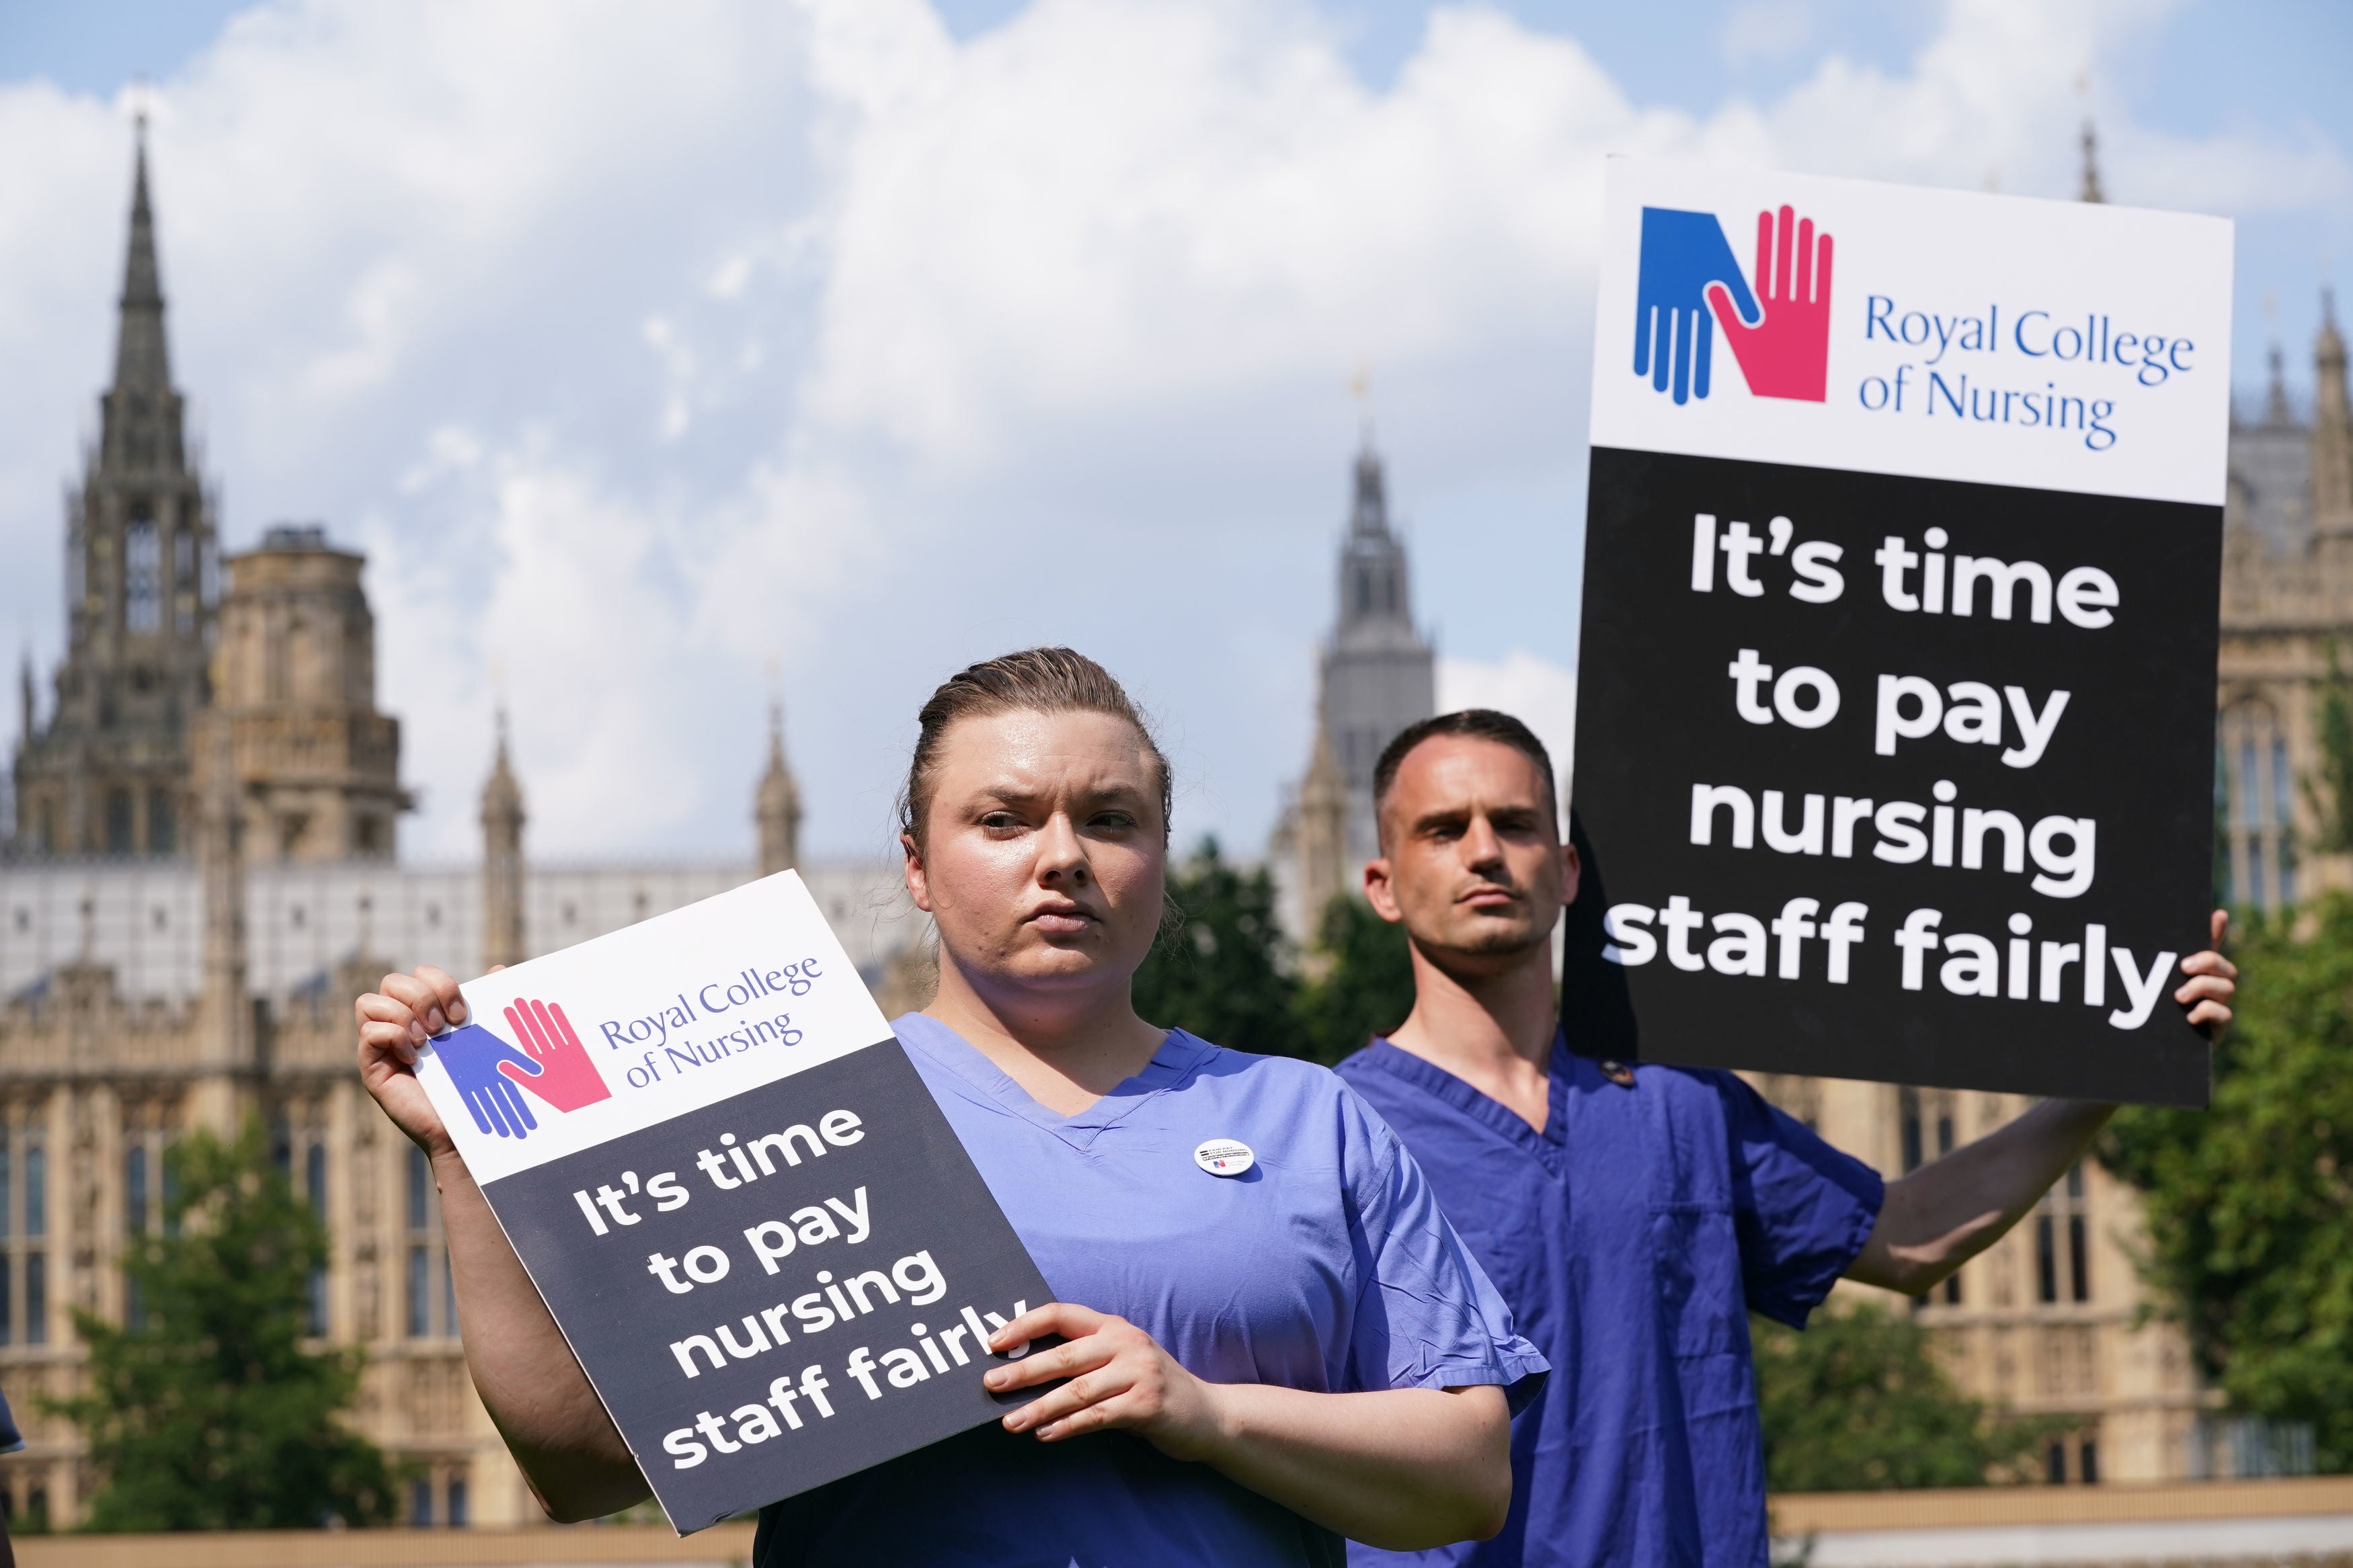 ‘Our members are saying enough is enough,’ said the RCN’s Pat Cullen